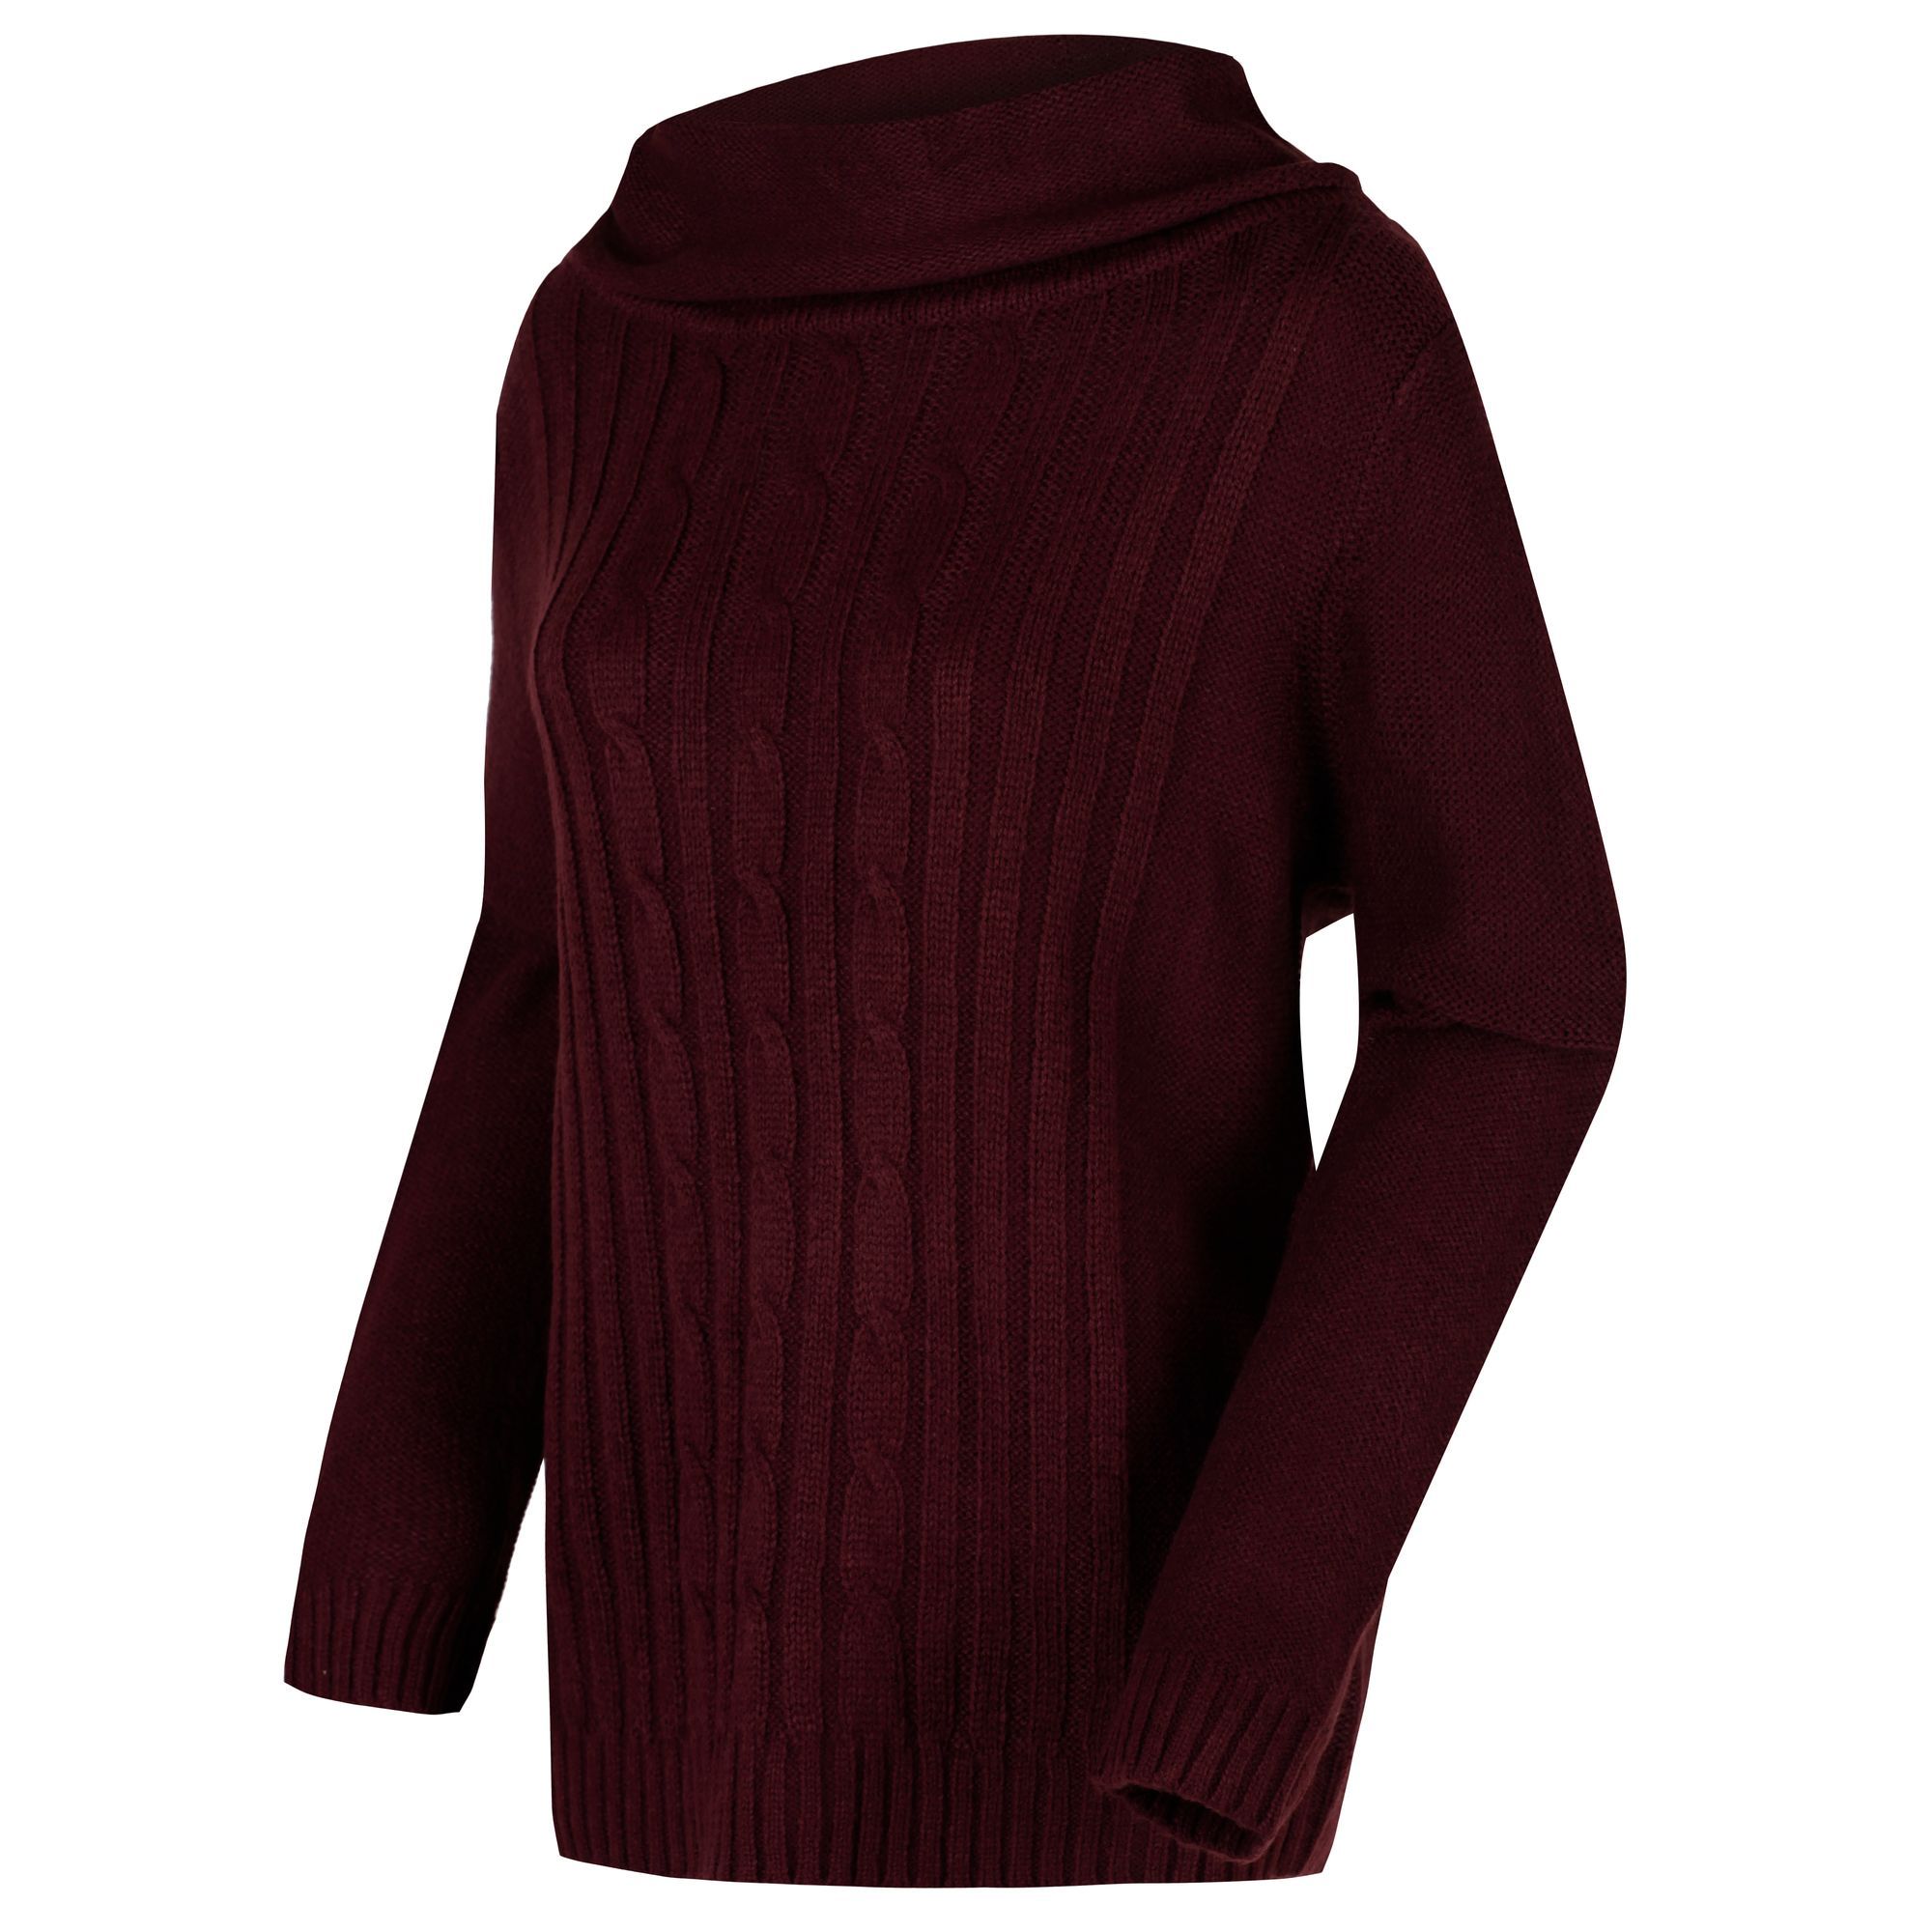 100% acrylic. Easy-wearing, easy-caring, soft knit jumper with an insulating cable knit front and beautiful drapey cowl neck. In Regatta heritage colours with a small metal badge on the hem. Regatta Womens sizing (bust approx): 6 (30in/76cm), 8 (32in/81cm), 10 (34in/86cm), 12 (36in/92cm), 14 (38in/97cm), 16 (40in/102cm), 18 (43in/109cm), 20 (45in/114cm), 22 (48in/122cm), 24 (50in/127cm), 26 (52in/132cm), 28 (54in/137cm), 30 (56in/142cm), 32 (58in/147cm), 34 (60in/152cm), 36 (62in/158cm). Non-bobble acrylic yarn.